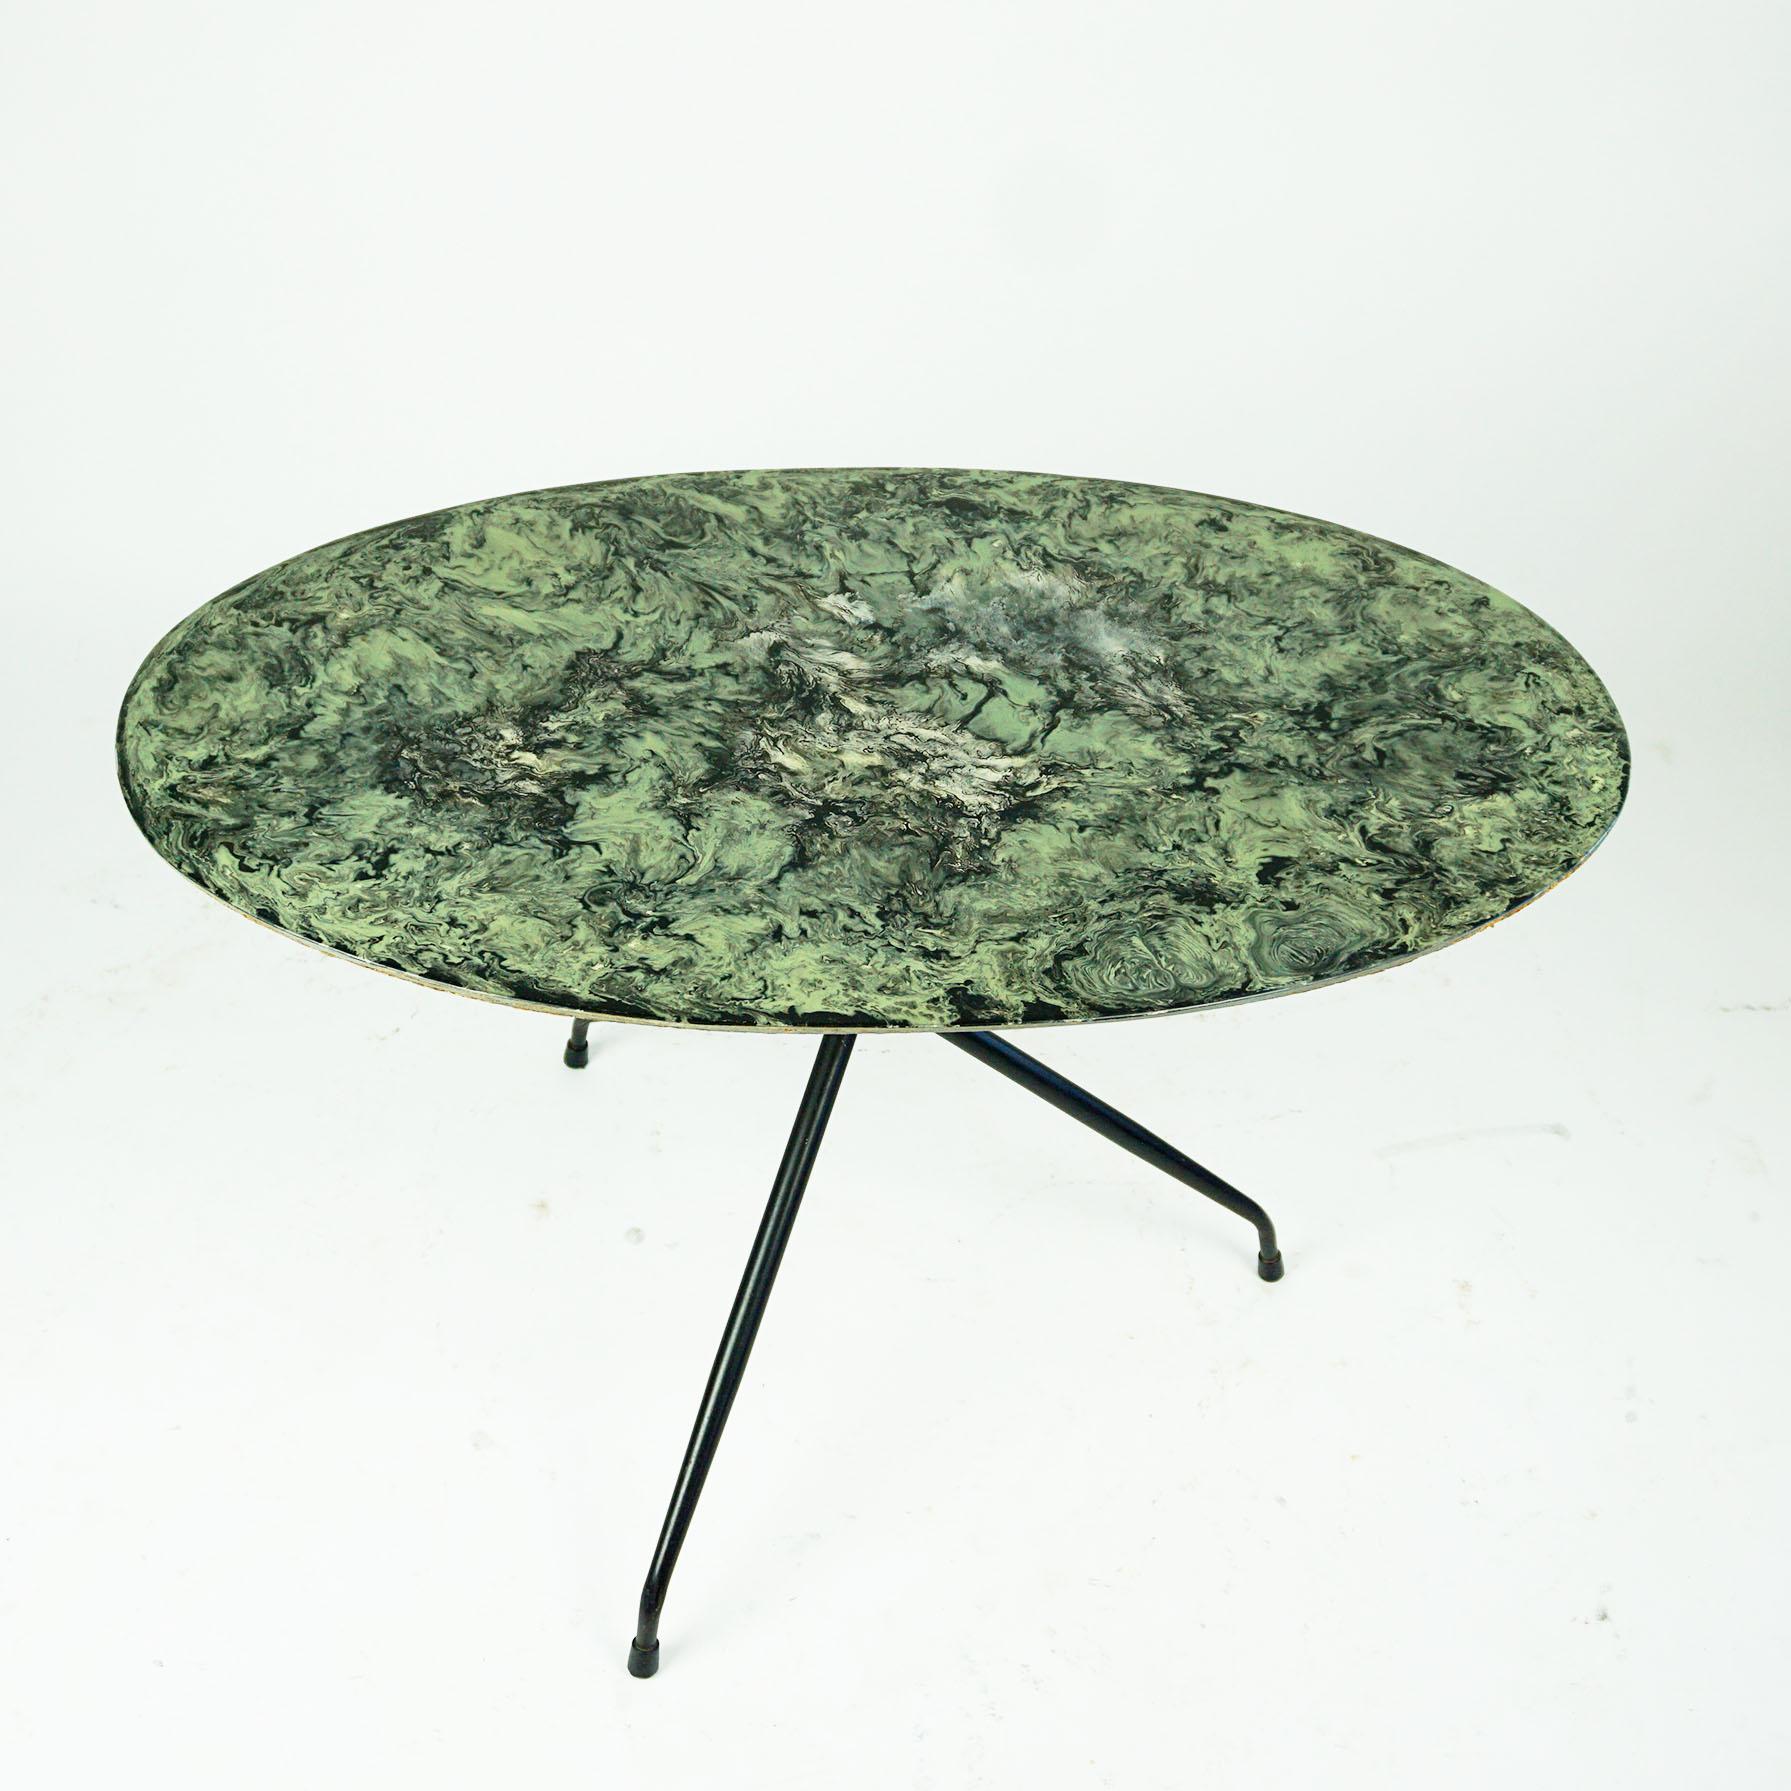 Lacquered Italian Midcentury Oval Cocktail or Coffee Table with Faux Green Marble Top